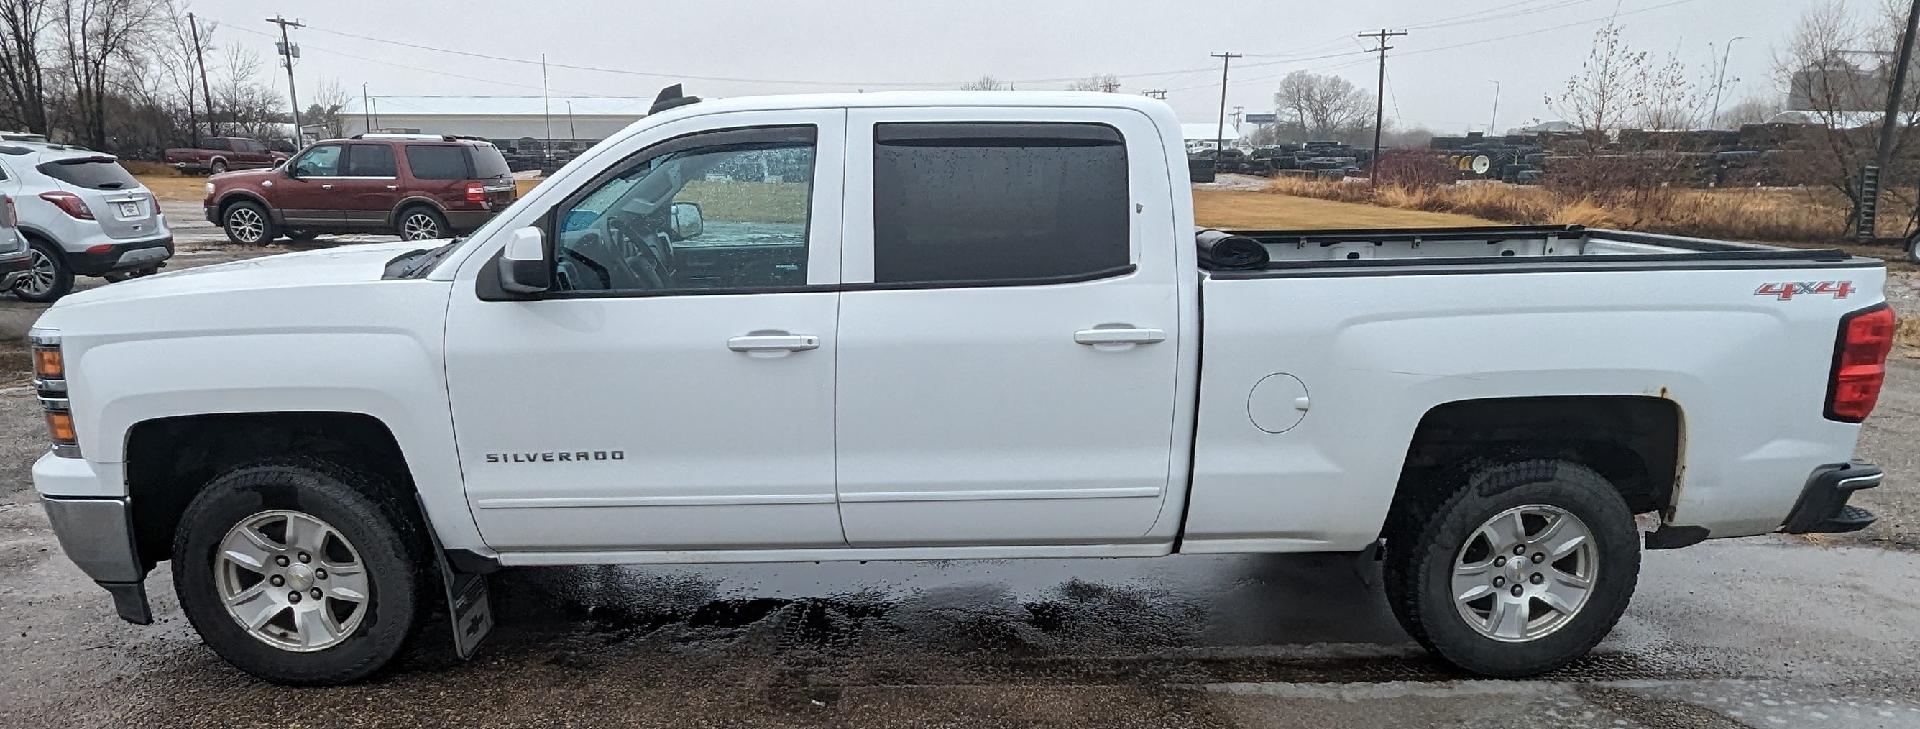 Used 2015 Chevrolet Silverado 1500 LT with VIN 3GCUKREH9FG278477 for sale in Milbank, SD